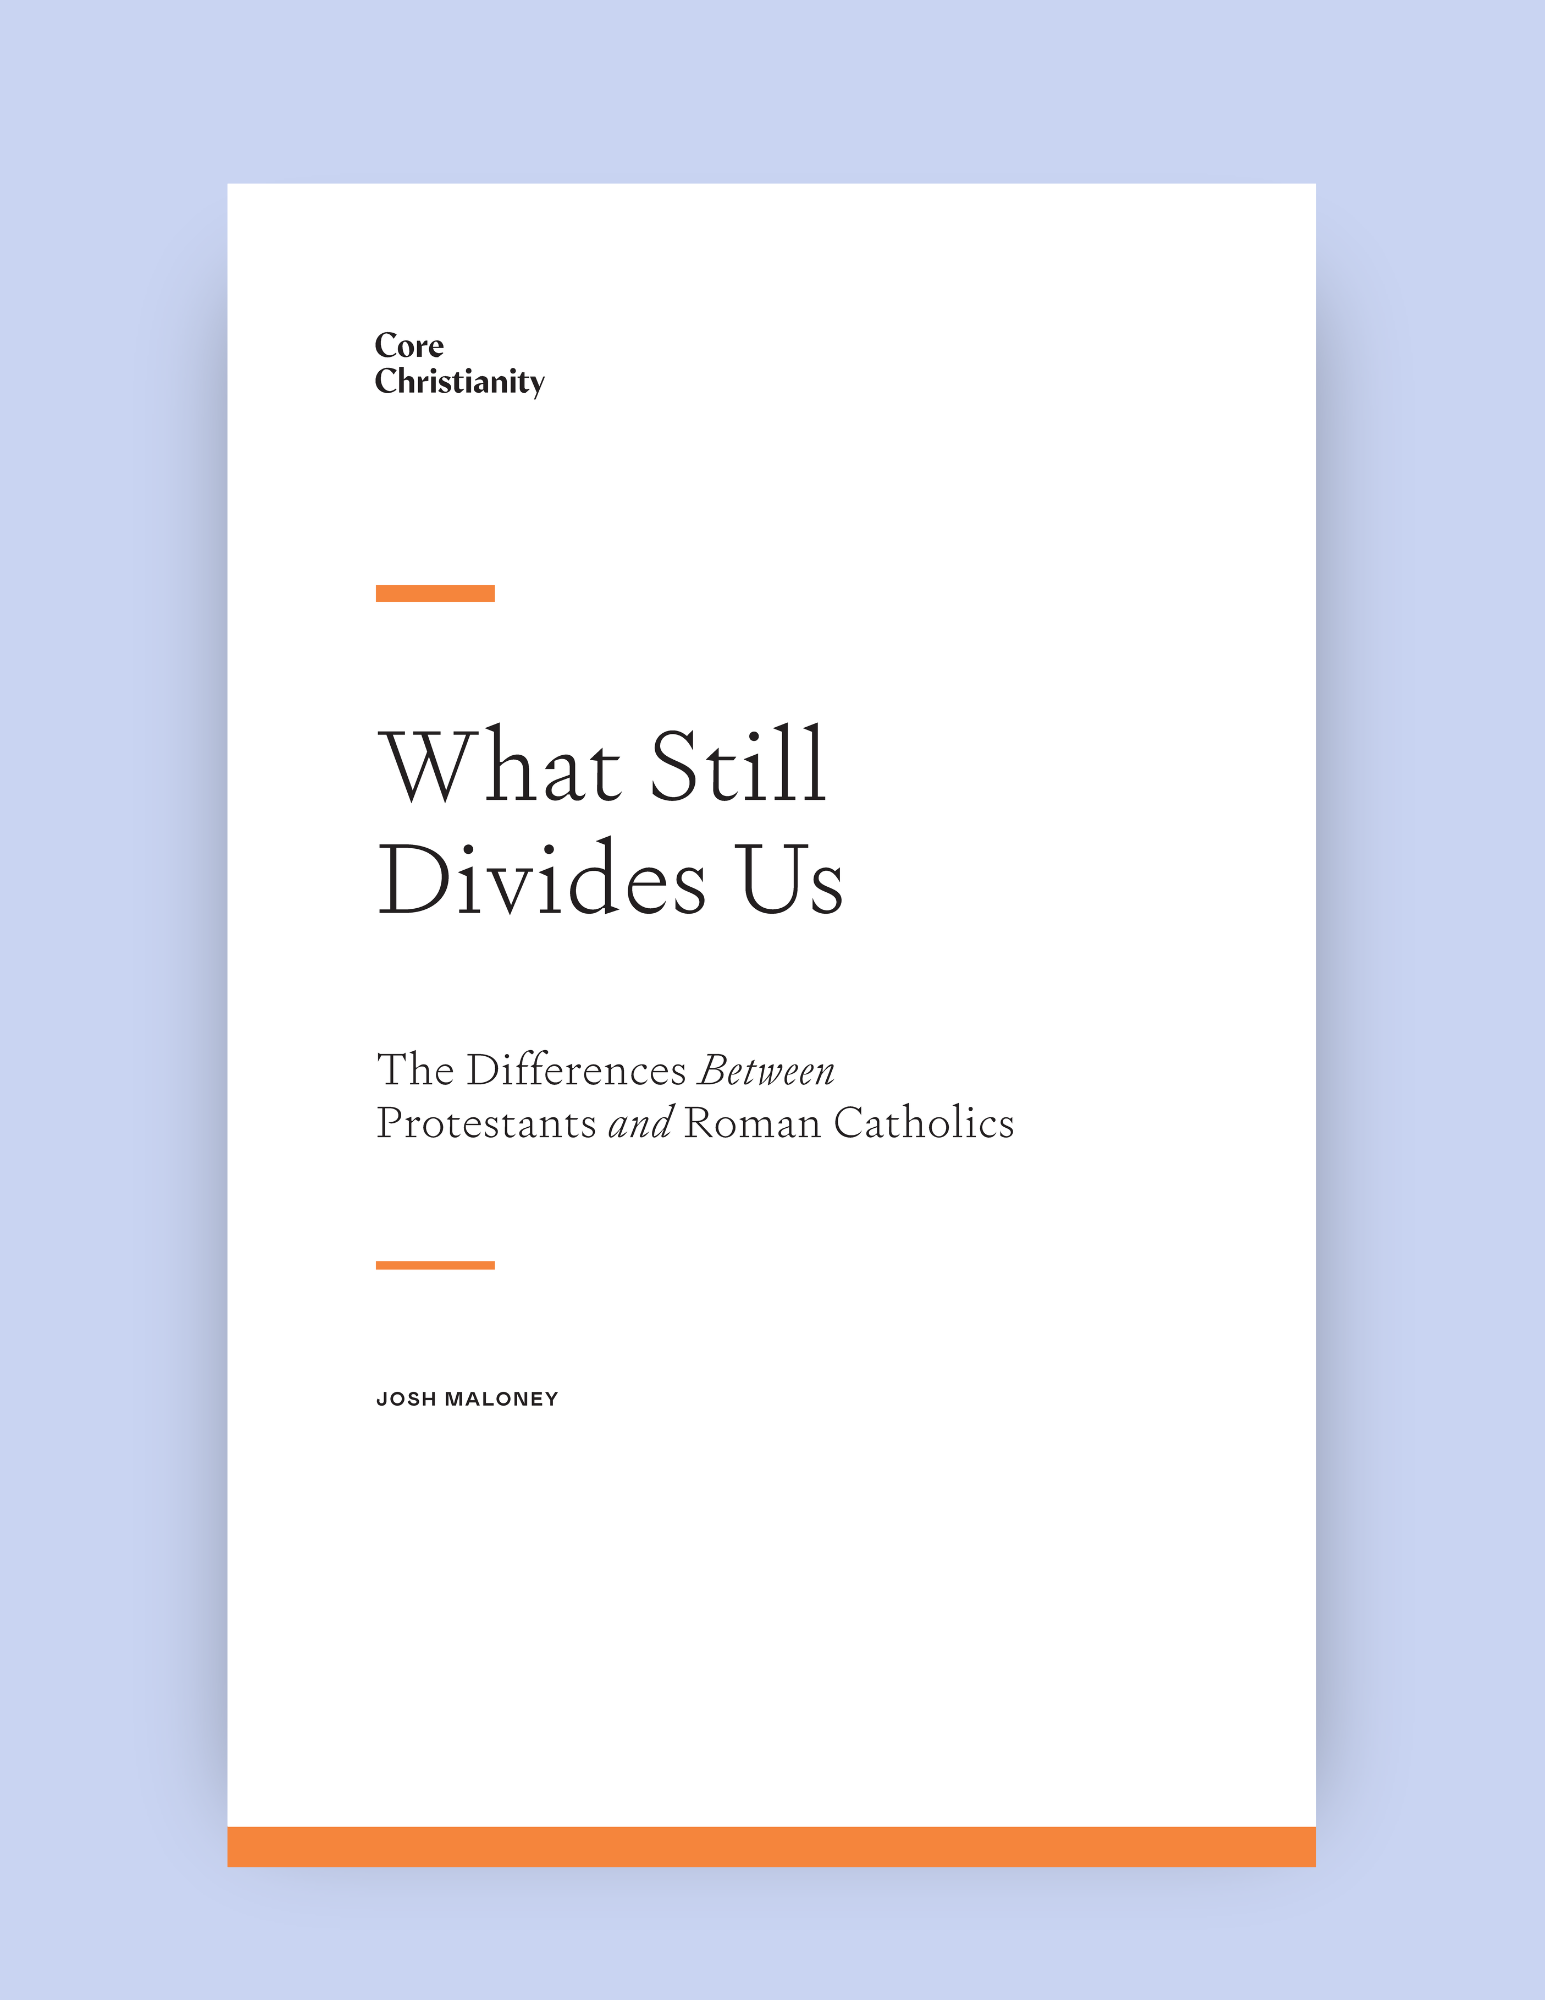 What Still Divides Us:  The Differences Between Protestants and Roman Catholics